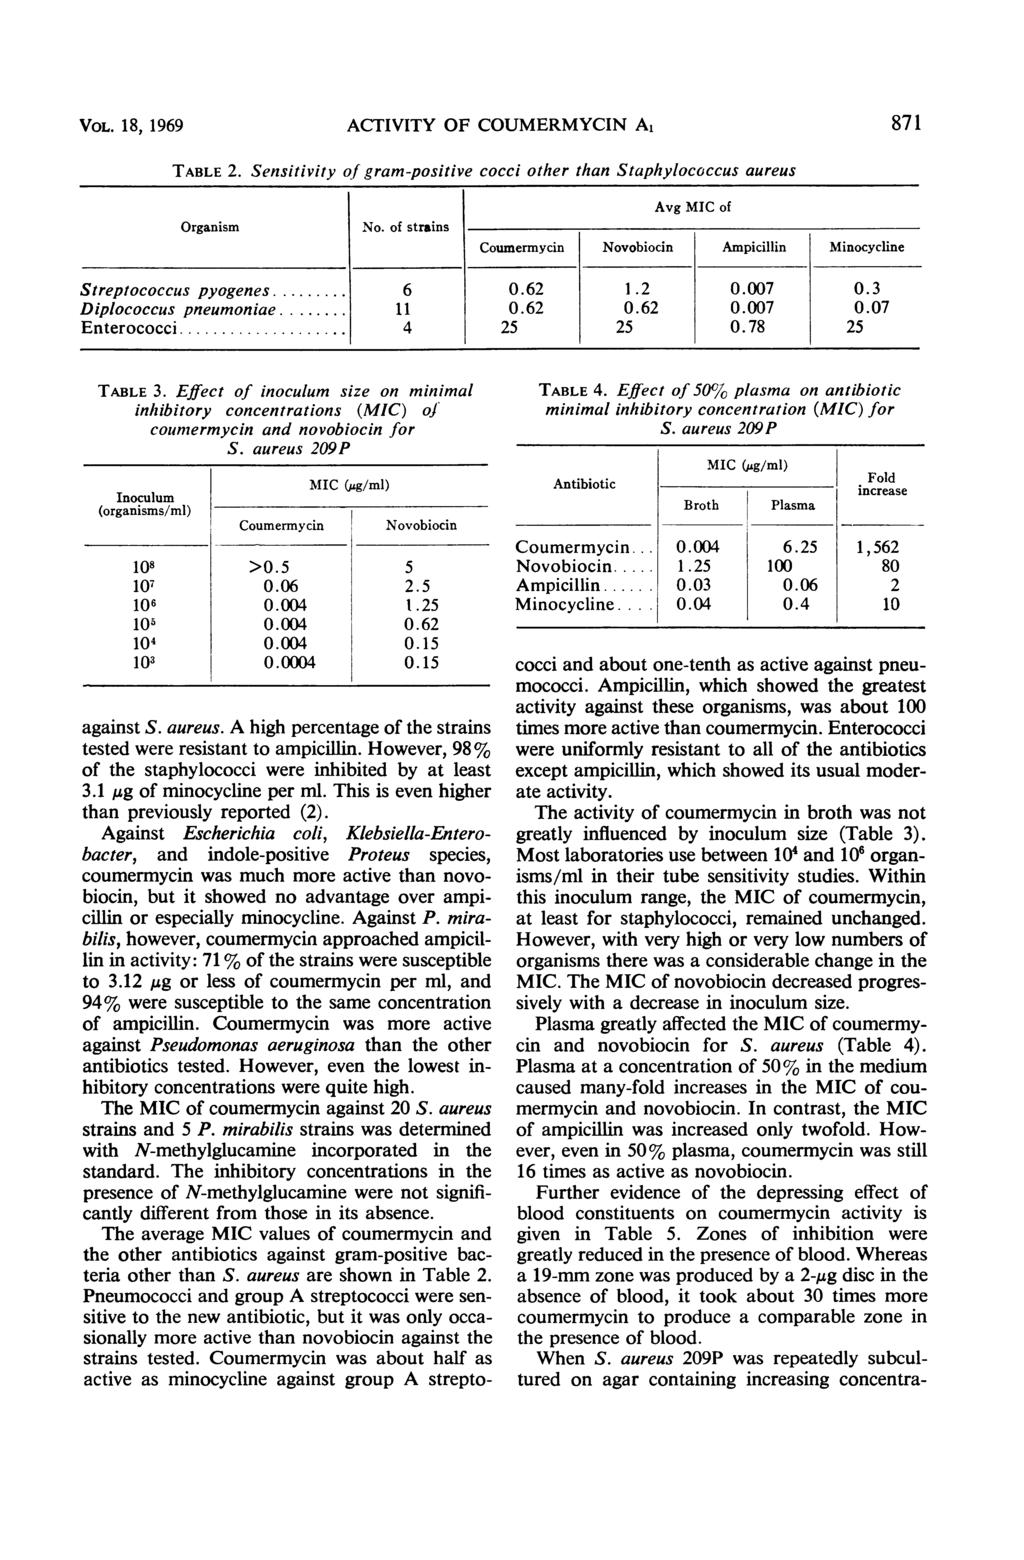 VOL. 1, 1969 TABLE 2. Organism ACTIVITY OF COUMERMYCIN A71 Sensitivity of gram-positive cocci other than Staphylococcus aureus Avg MIC of No.